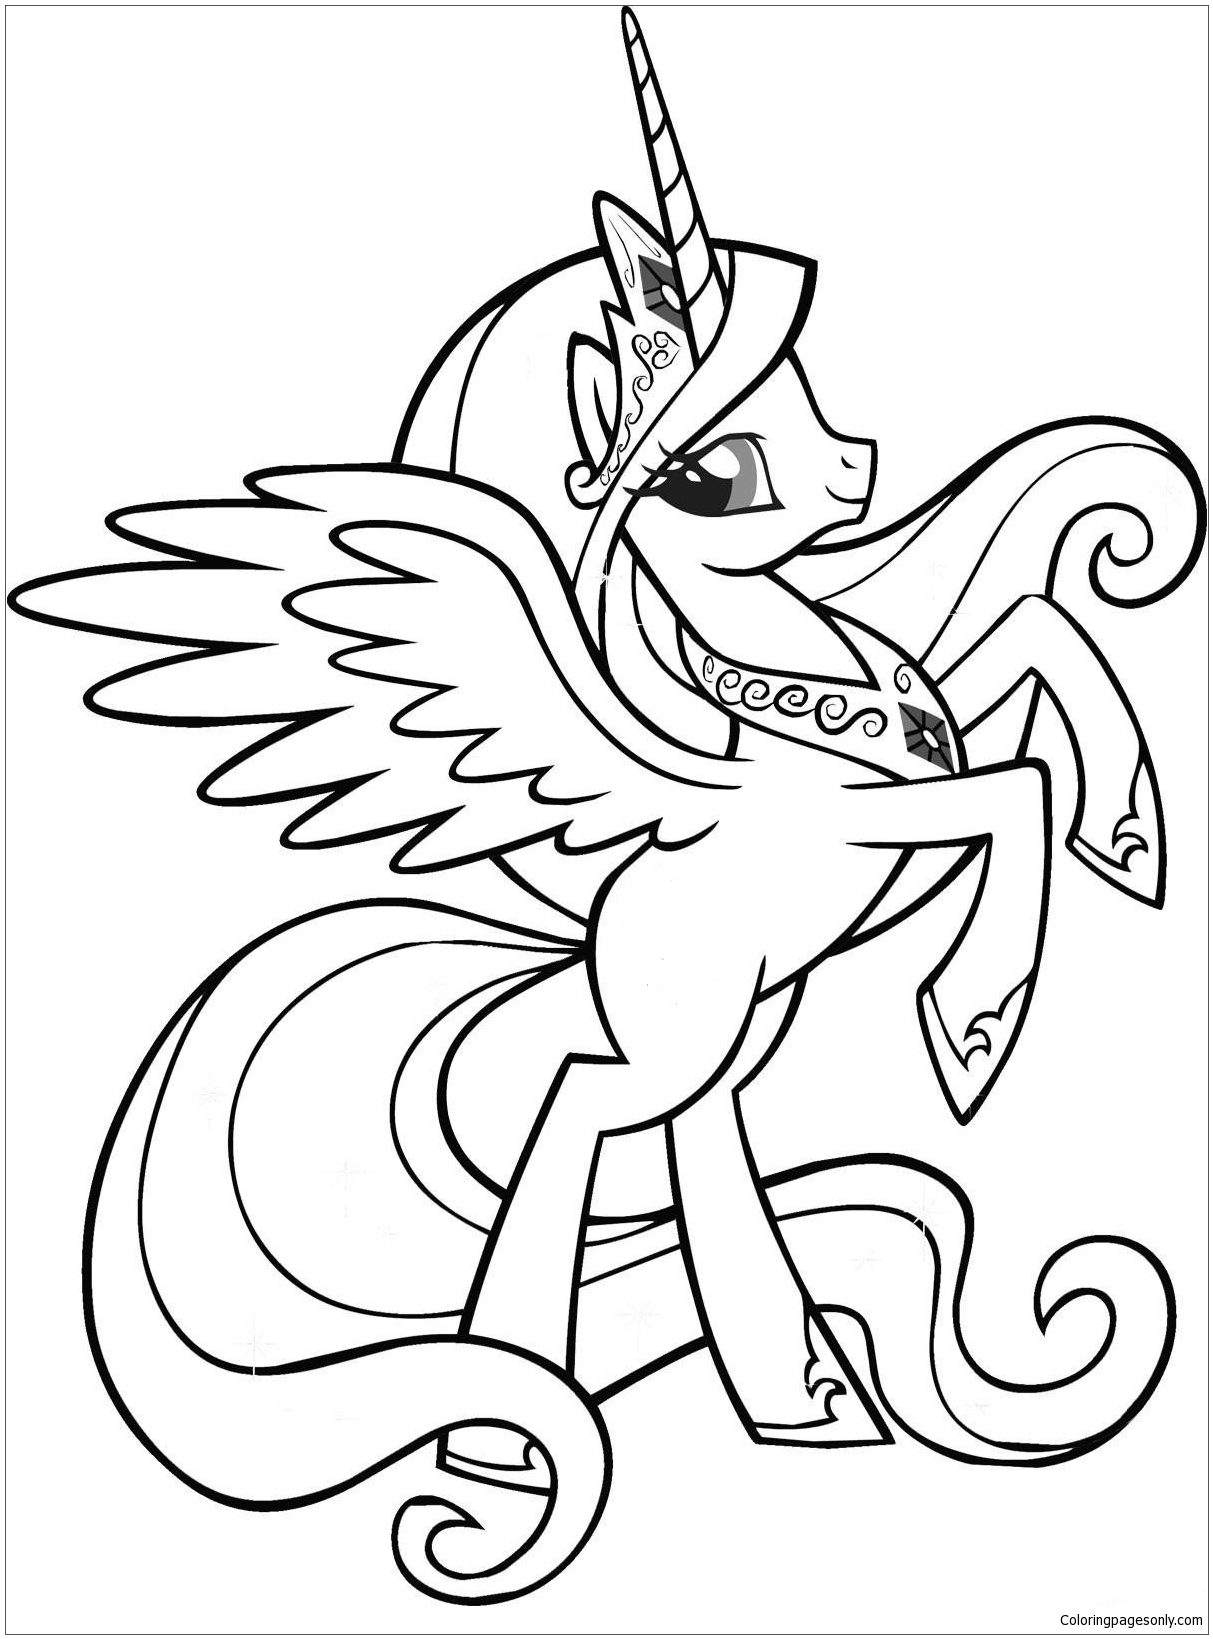 cute unicorn image 4 coloring pages cartoons coloring pages